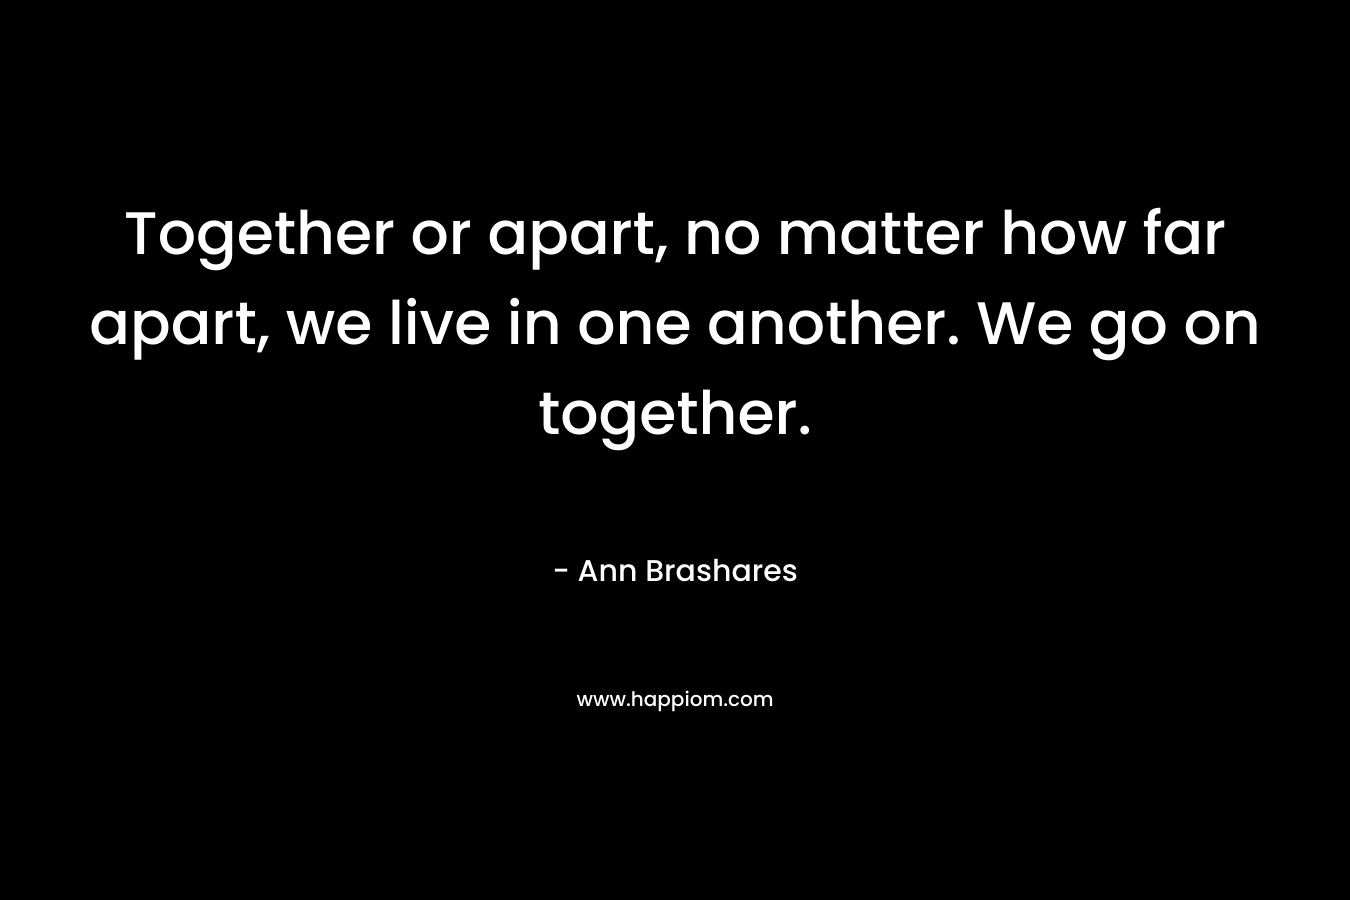 Together or apart, no matter how far apart, we live in one another. We go on together.